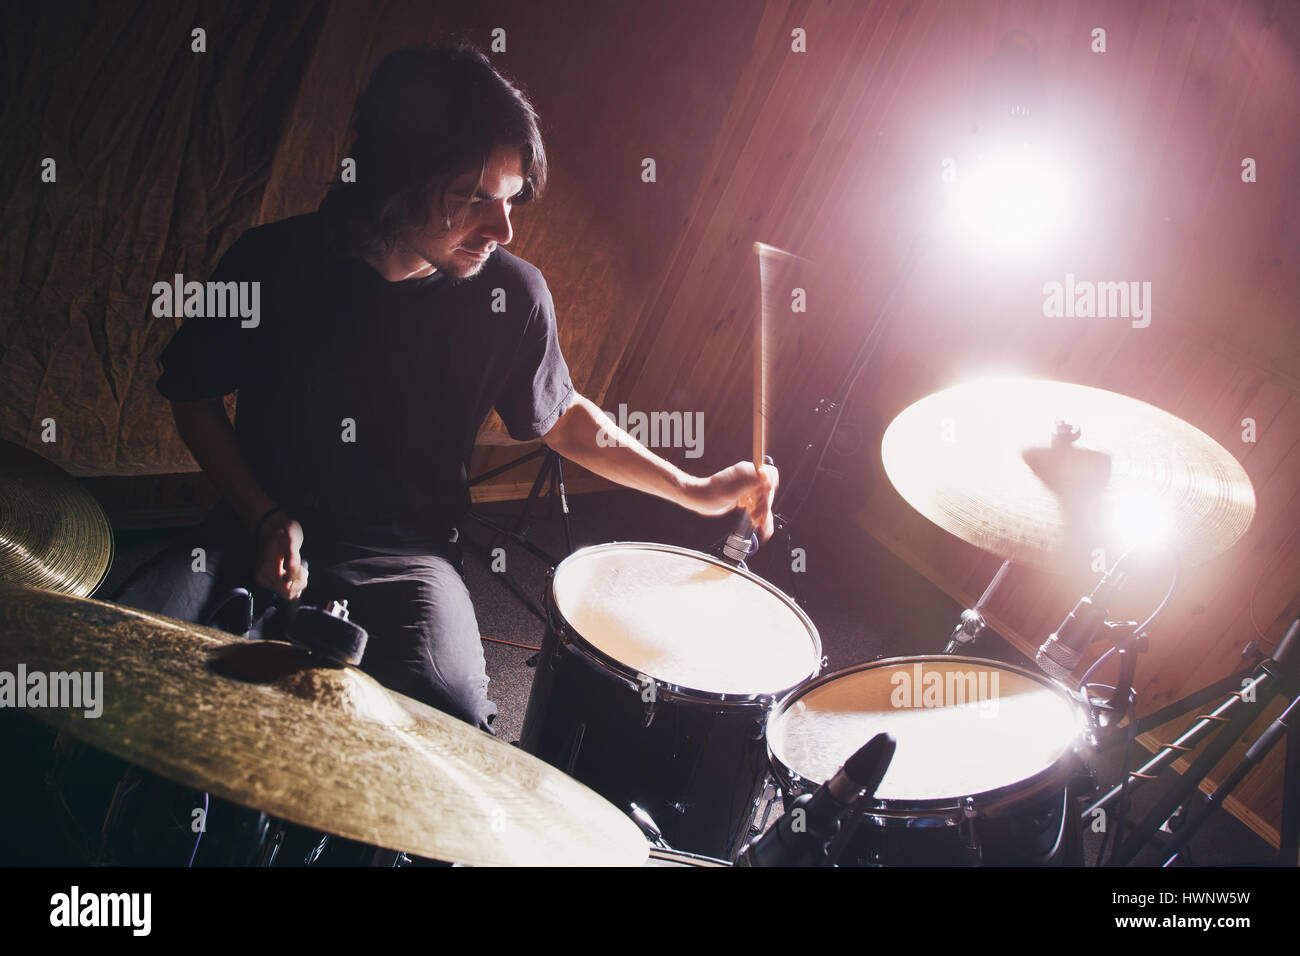 Rock and roll drummer Stock Photo